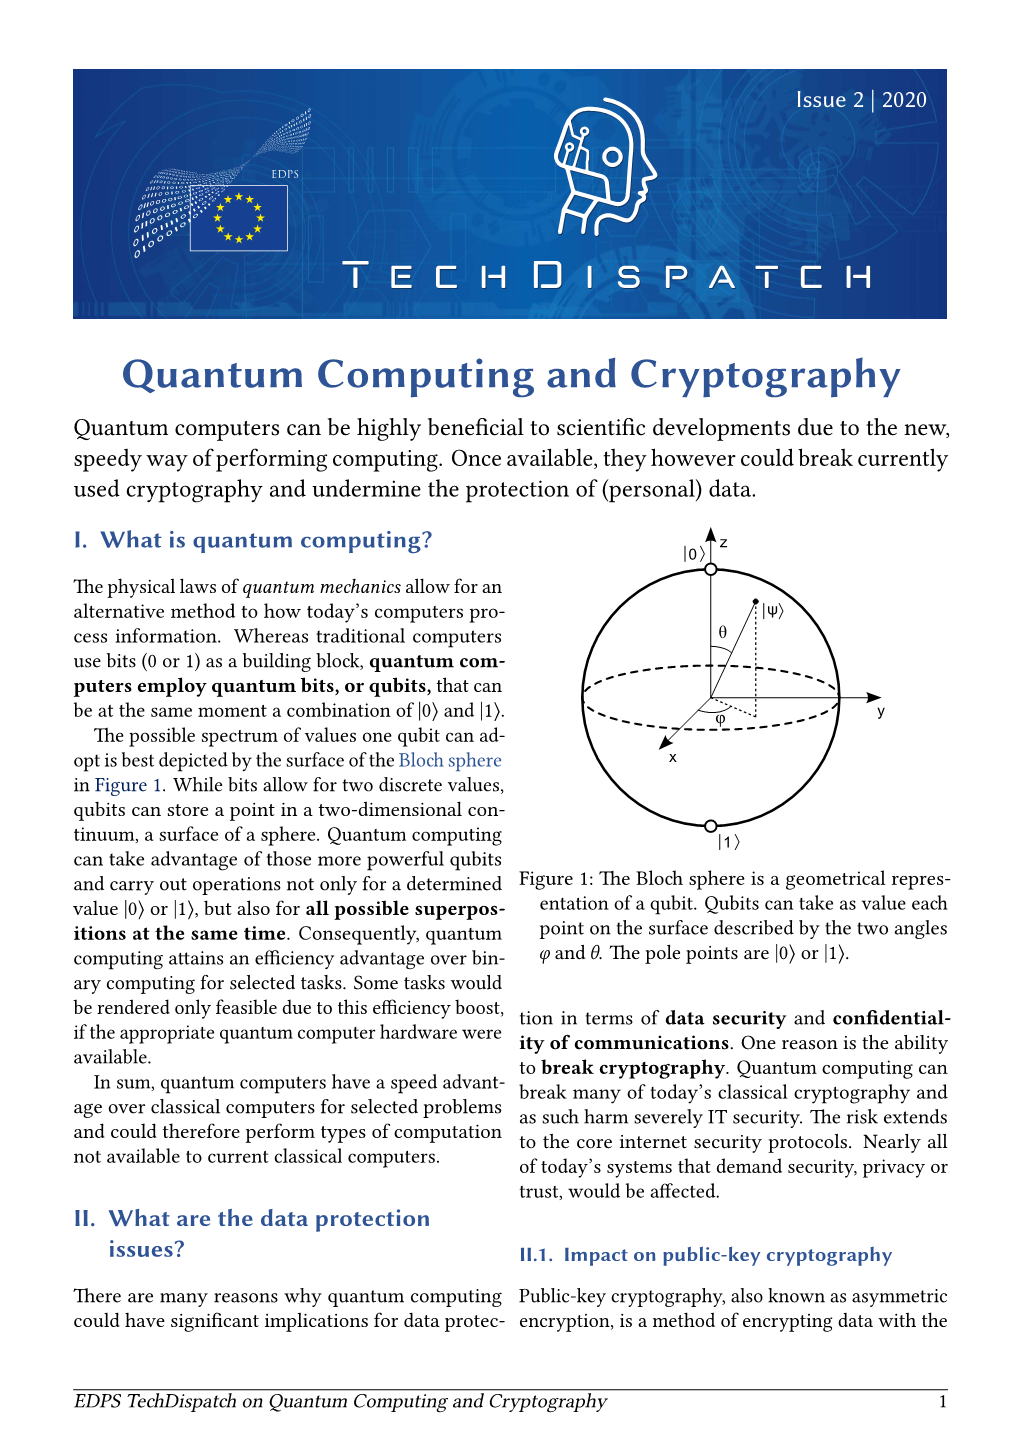 Quantum Computing and Cryptography Quantum Computers Can Be Highly Beneficial to Scientific Developments Due to the New, Speedy Way of Performing Computing